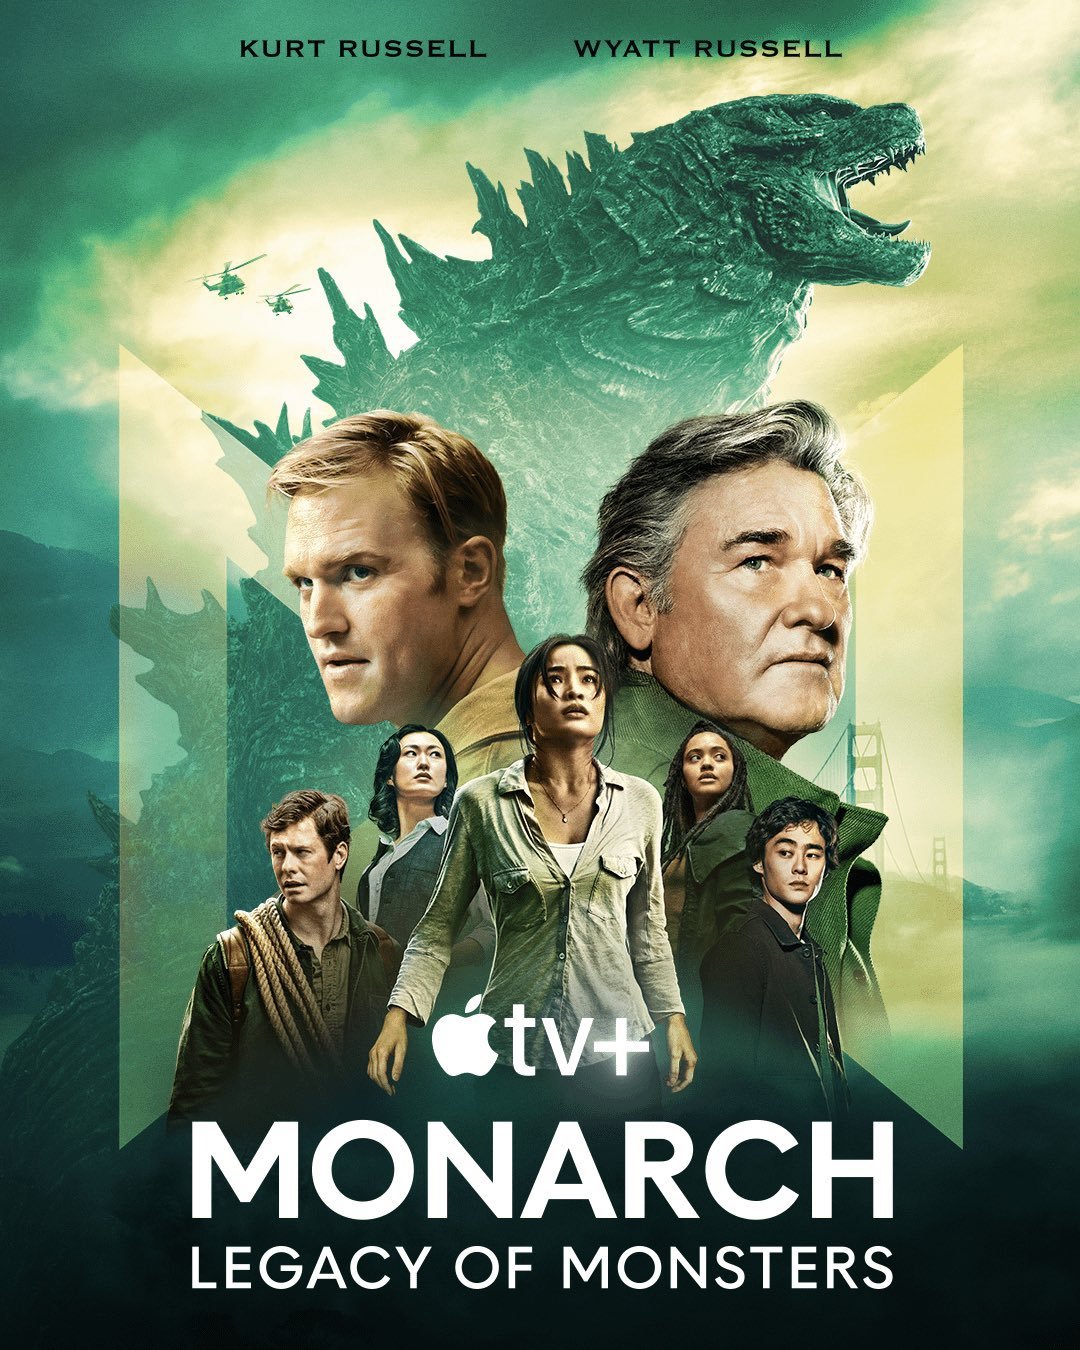 monarch-legacy-of-monsters_2ar6egv3